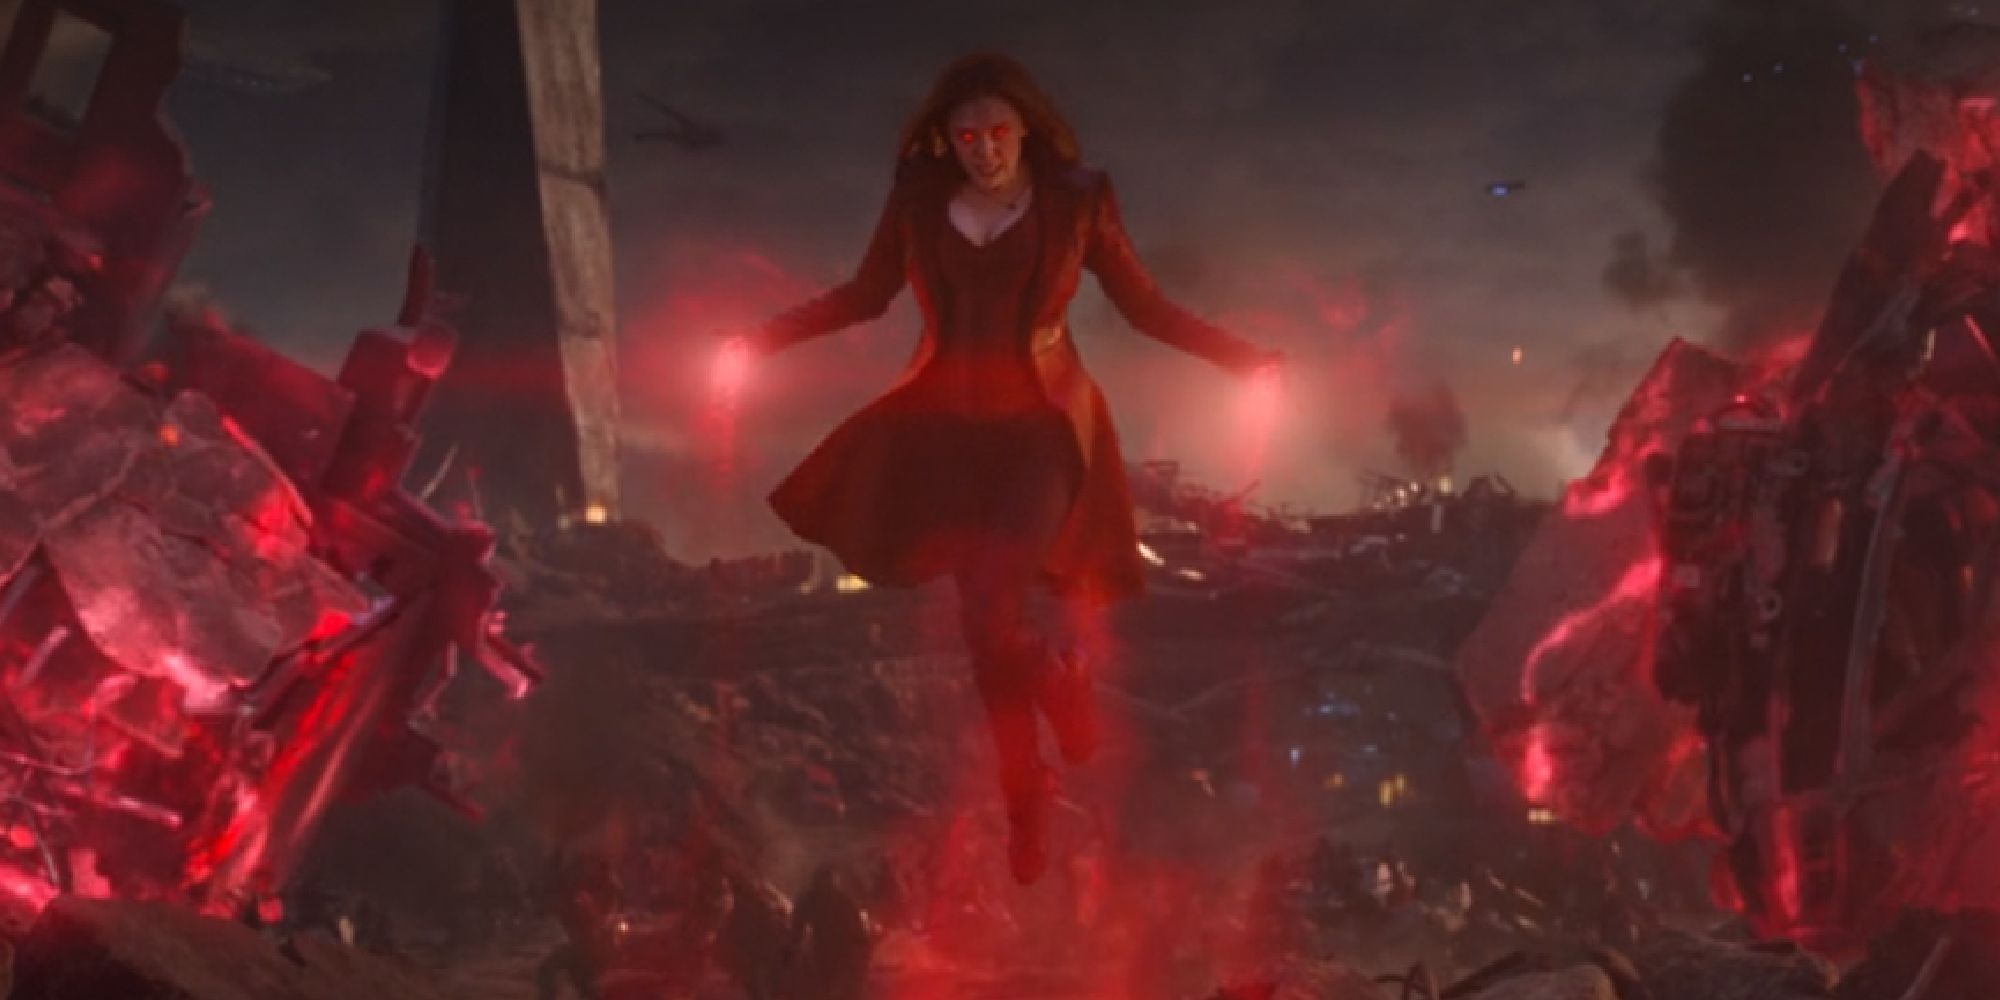 Wanda levitating rubble during her fight with Thanos in Endgame